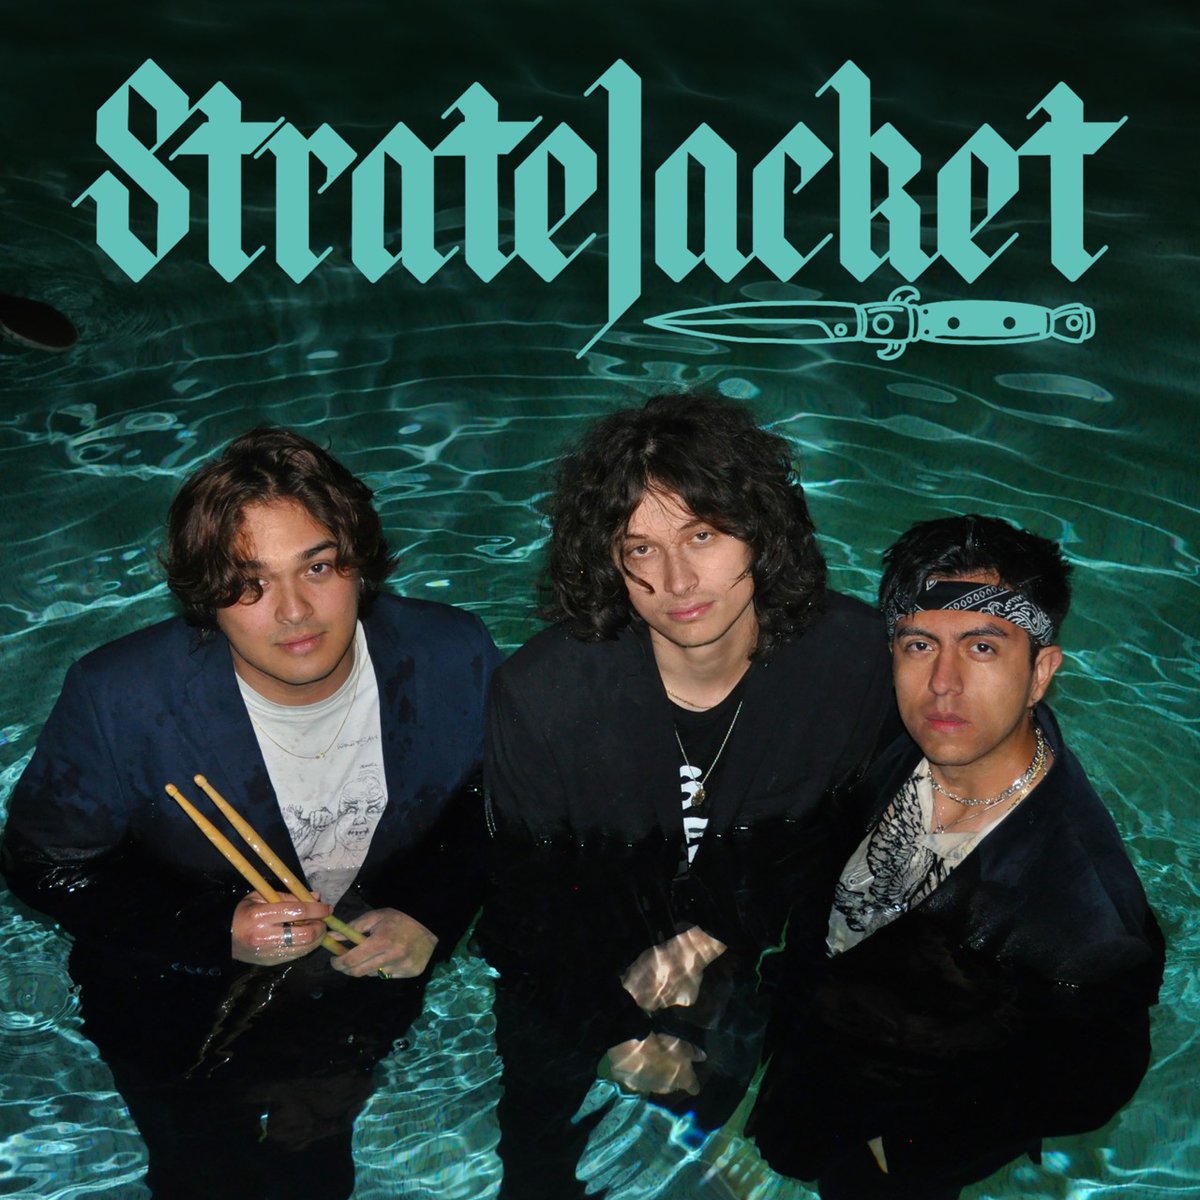 EP REVIEW: Stratejacket - @stratejacketca @EDGEOUTRecords @reybee distortedsoundmag.com/ep-review-stra…